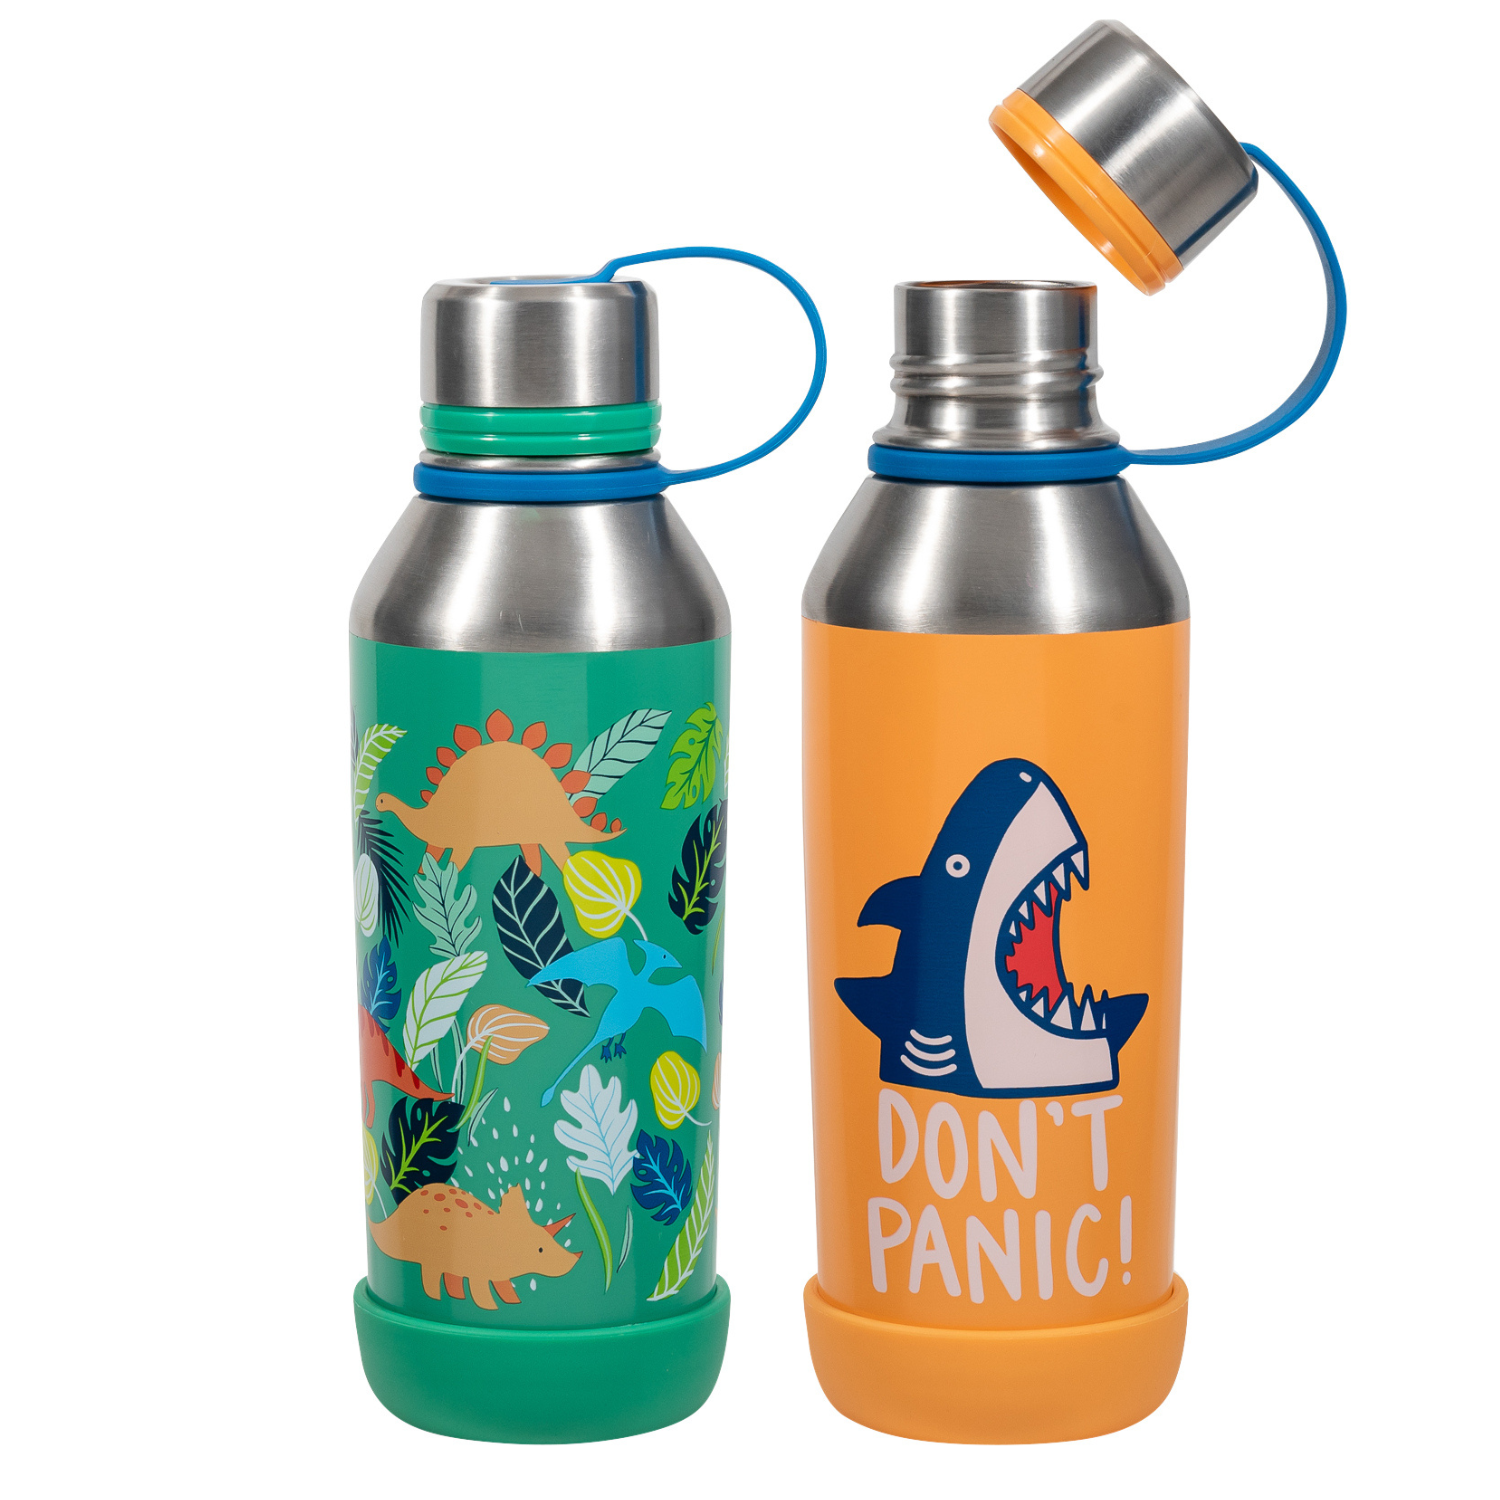 Cool Gear 2-Pack 16 oz Kid's Twist Water Bottle with Double Wall, Sipper  Lid and Finger Loop Cap with Printed Design | Great for School, Sports